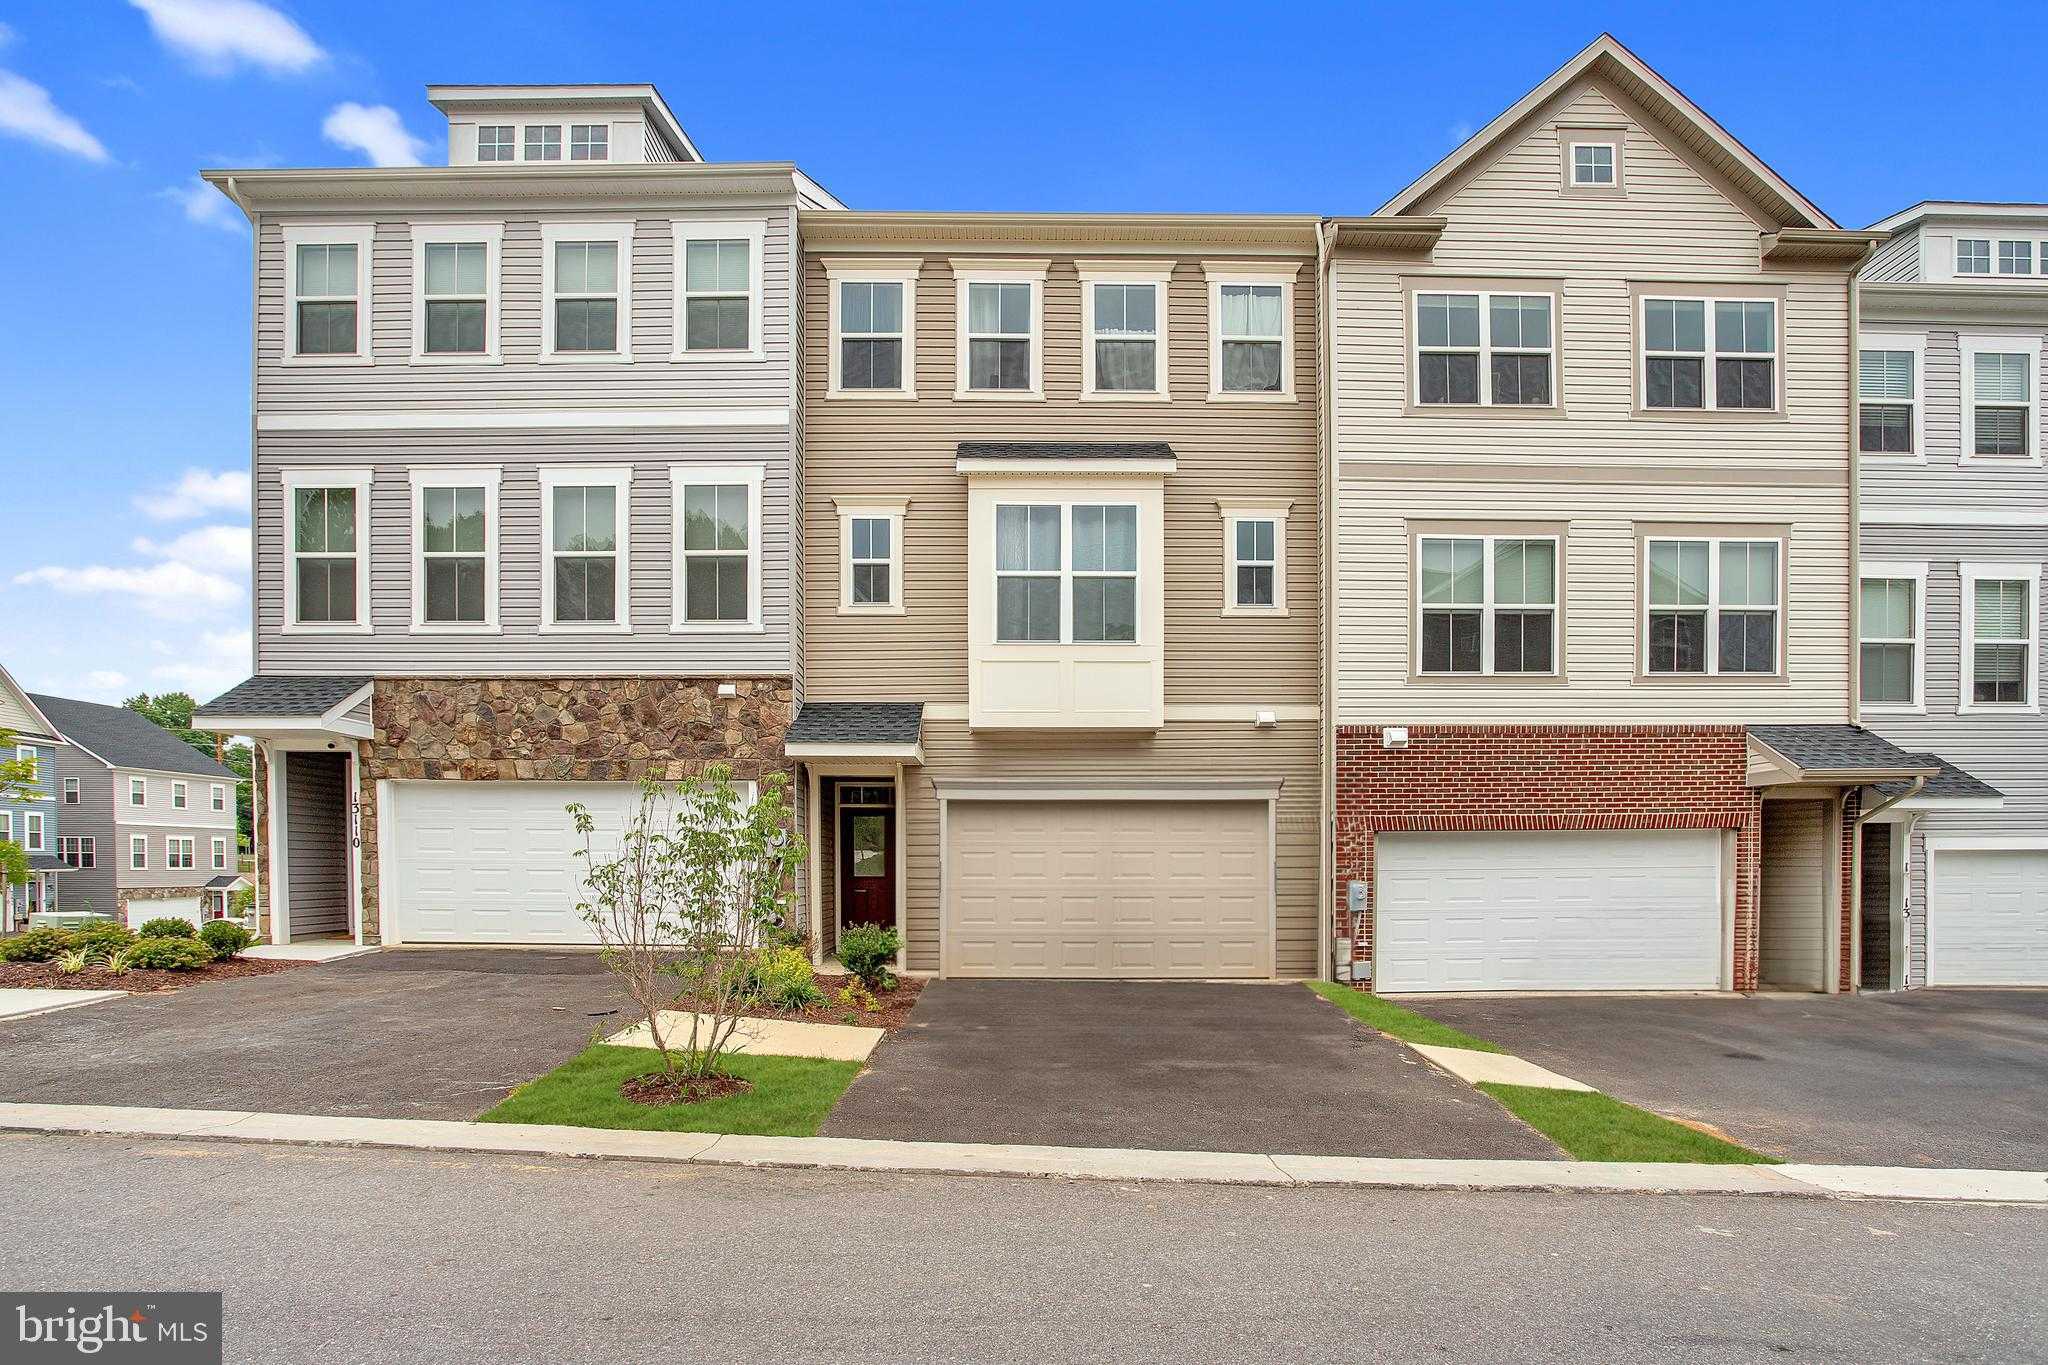 View CLARKSBURG, MD 20871 townhome